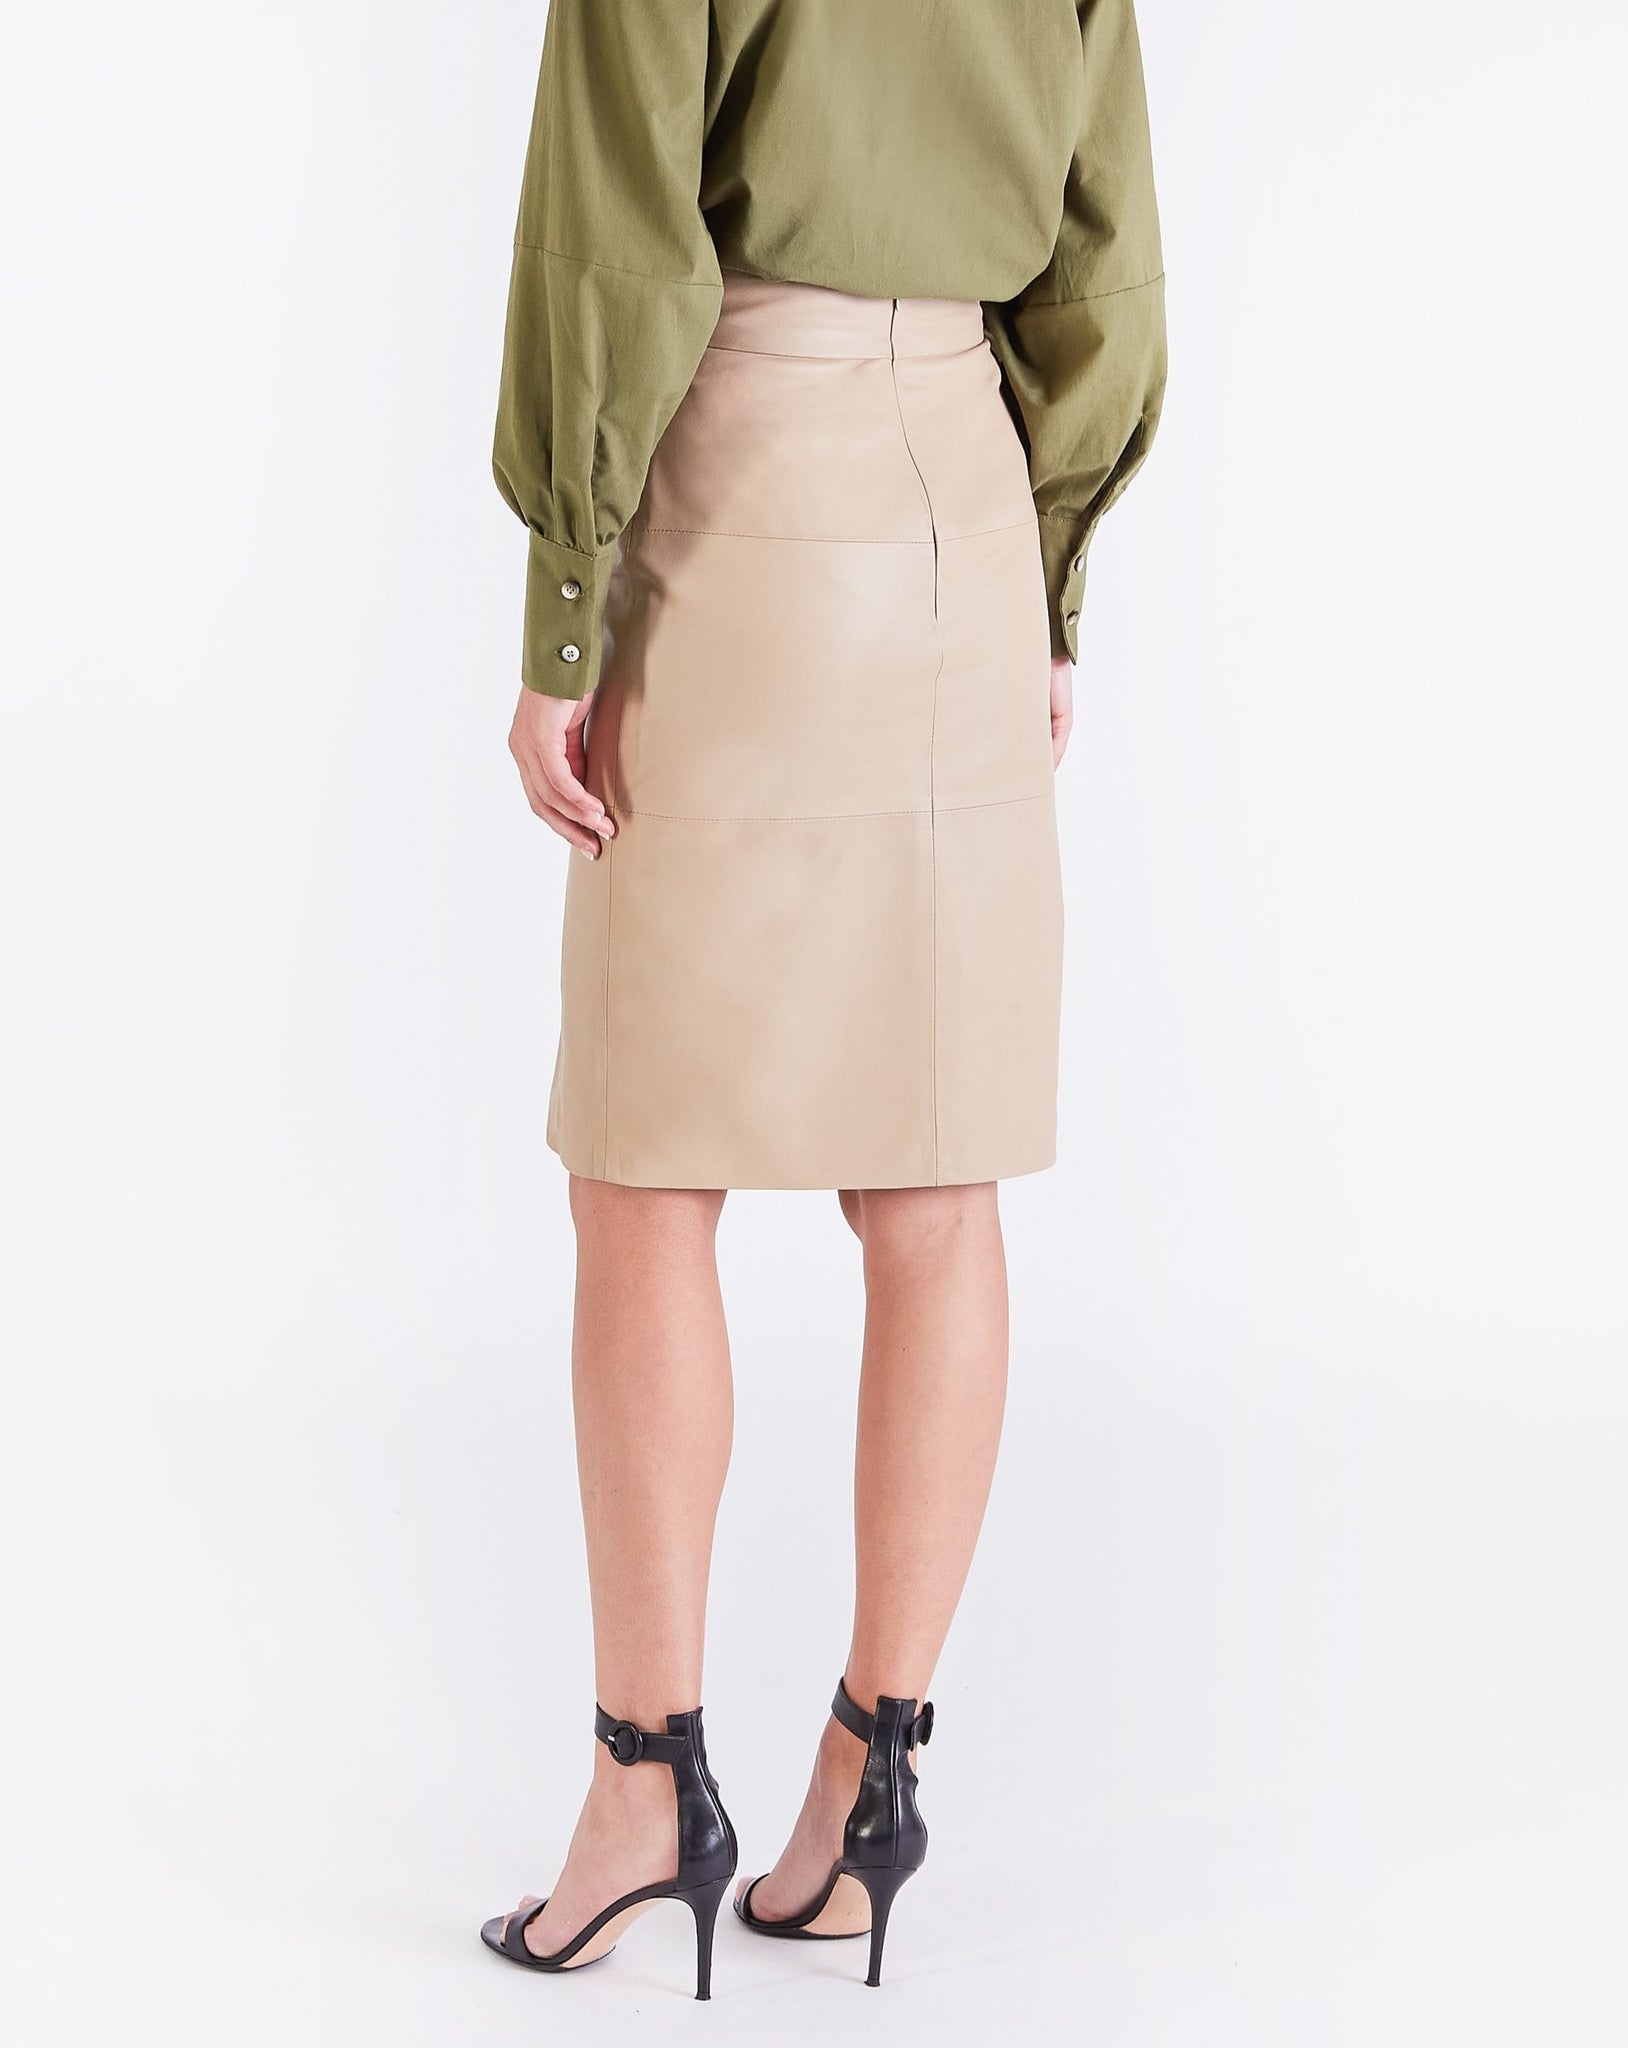 Lucy BUTTON FRONT LEATHER SKIRT - BEIGE